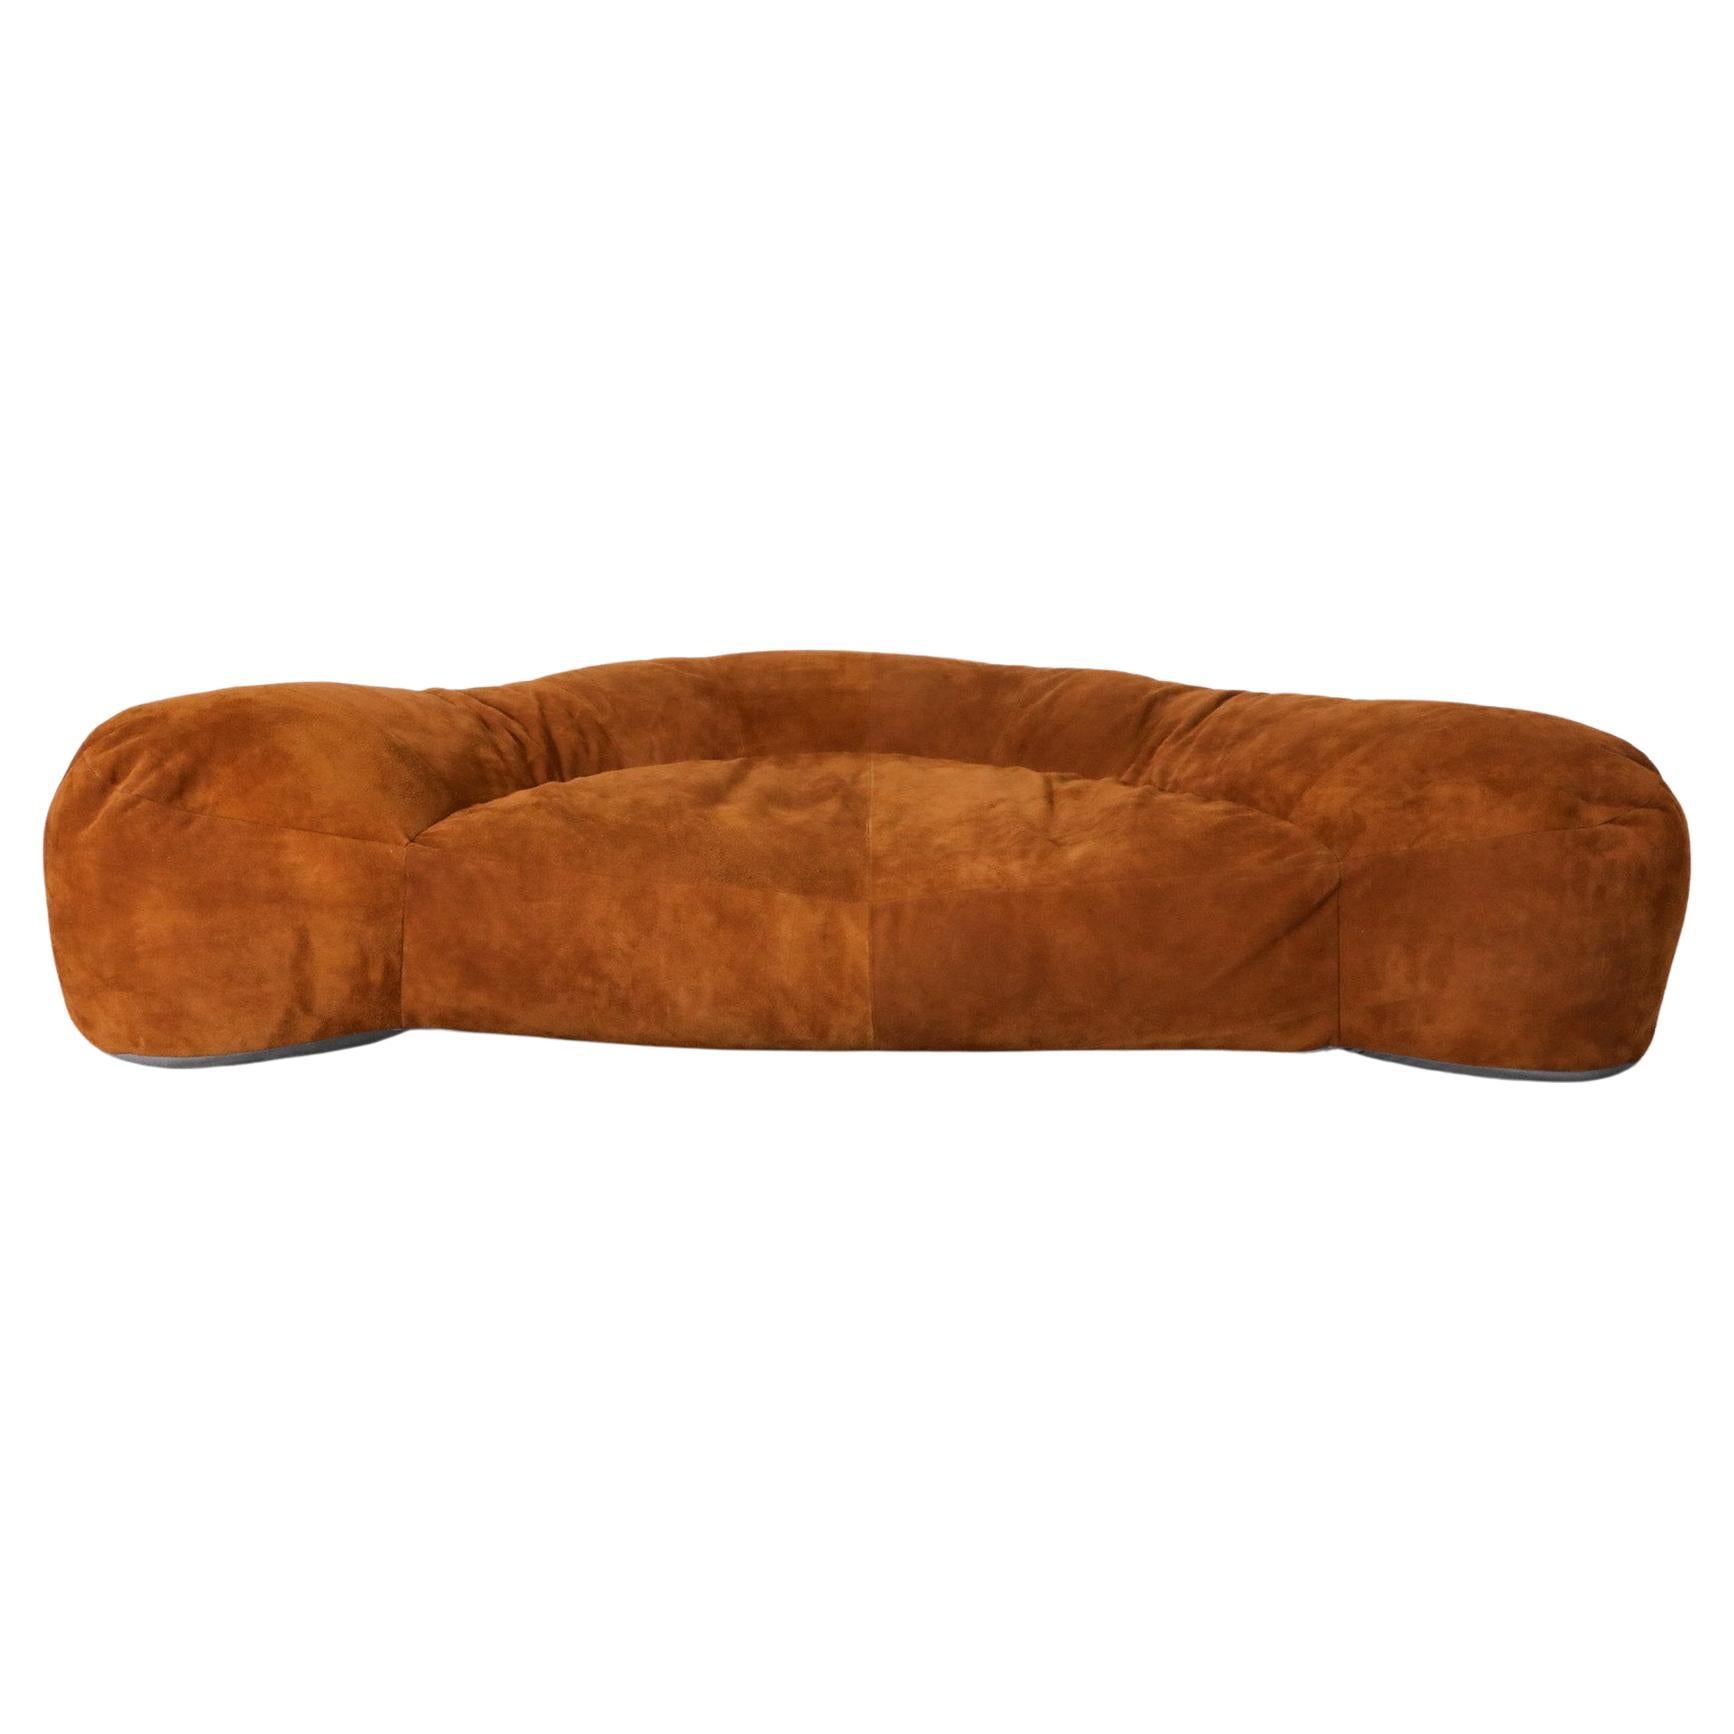 Raphael Raffel designed Cognac Leather Croissant Sofa, Newly made in Suede